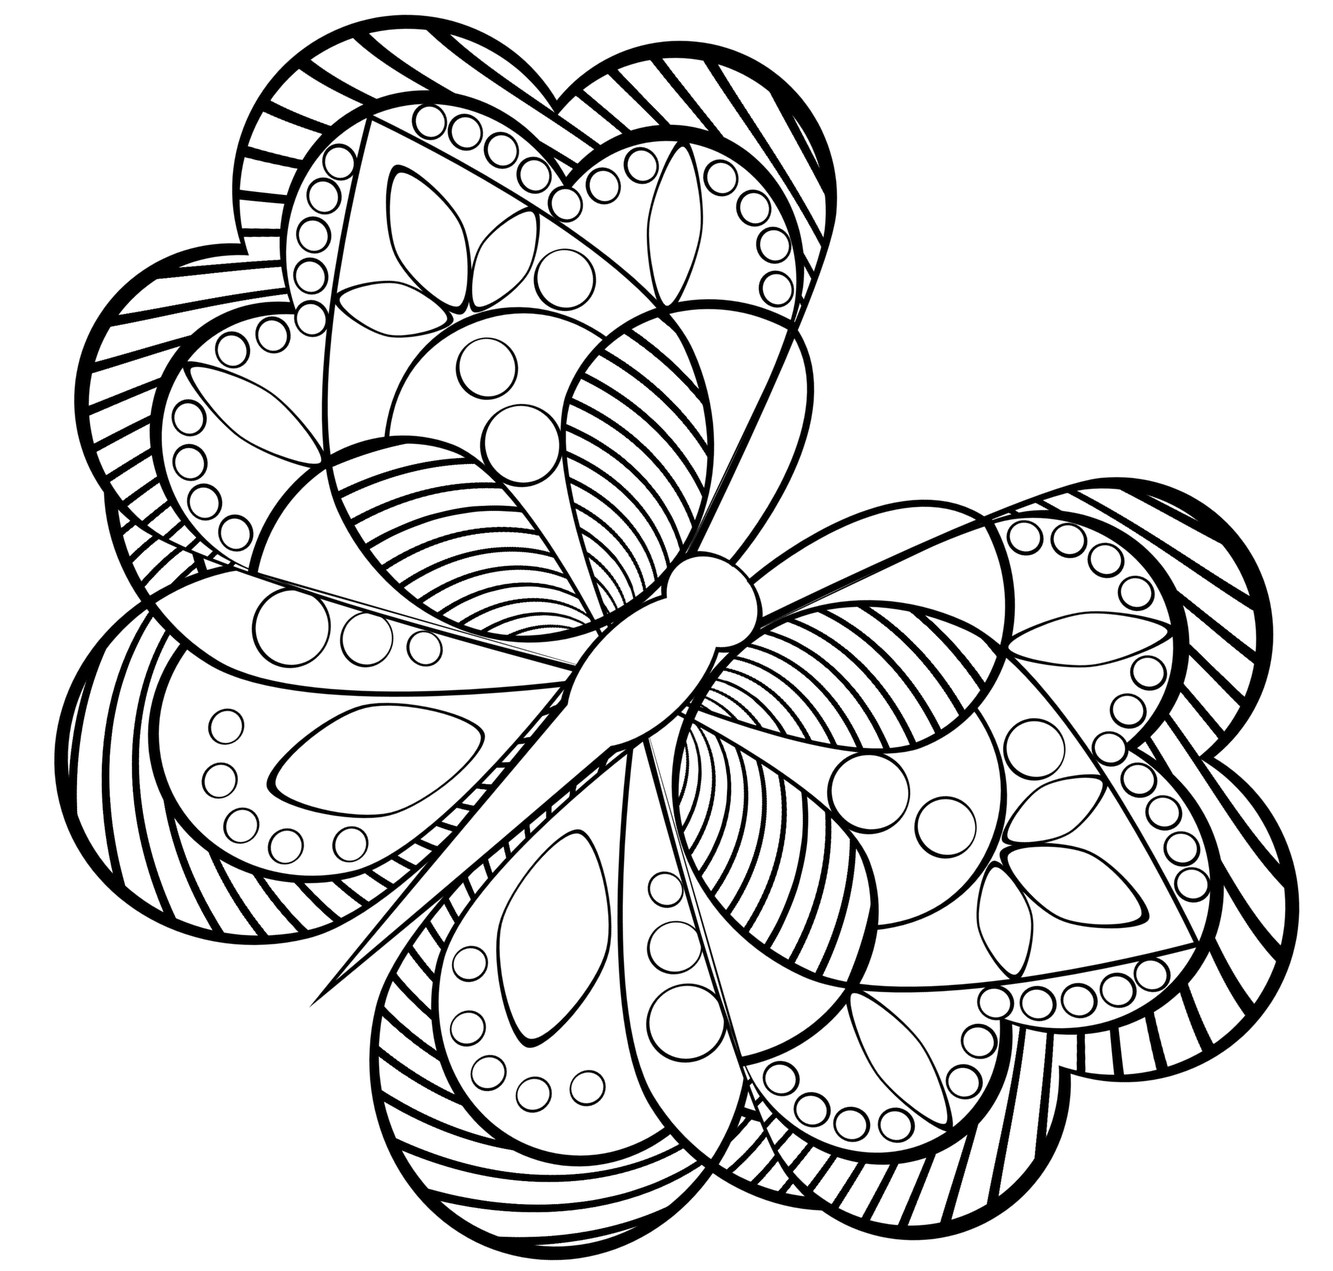 Cool Printable Coloring Pages For Adults
 52 Free Printable Advanced Coloring Pages Advanced Skill